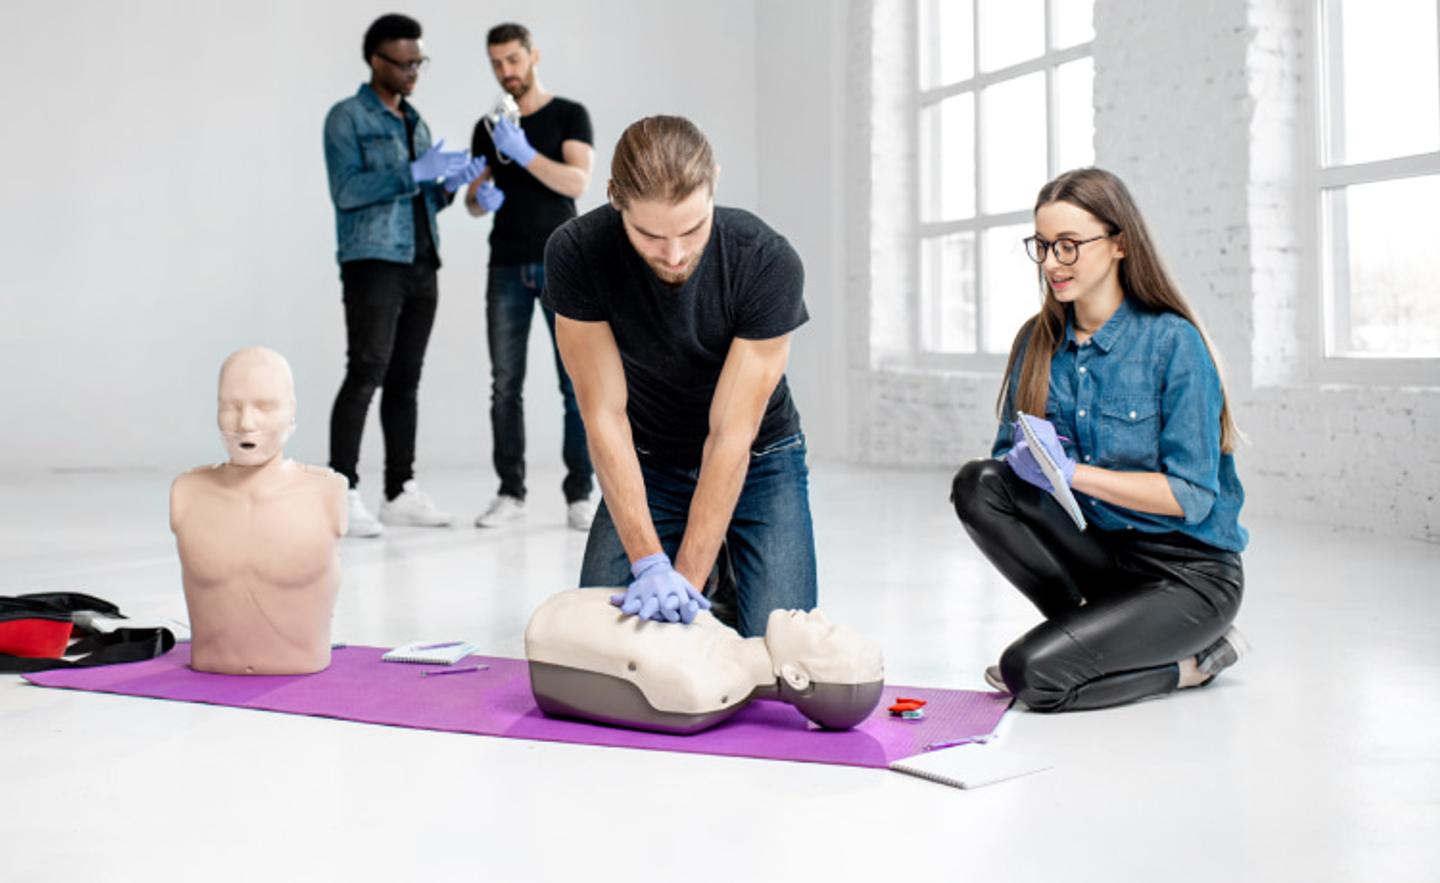 A woman teaching CPR techniques to a student